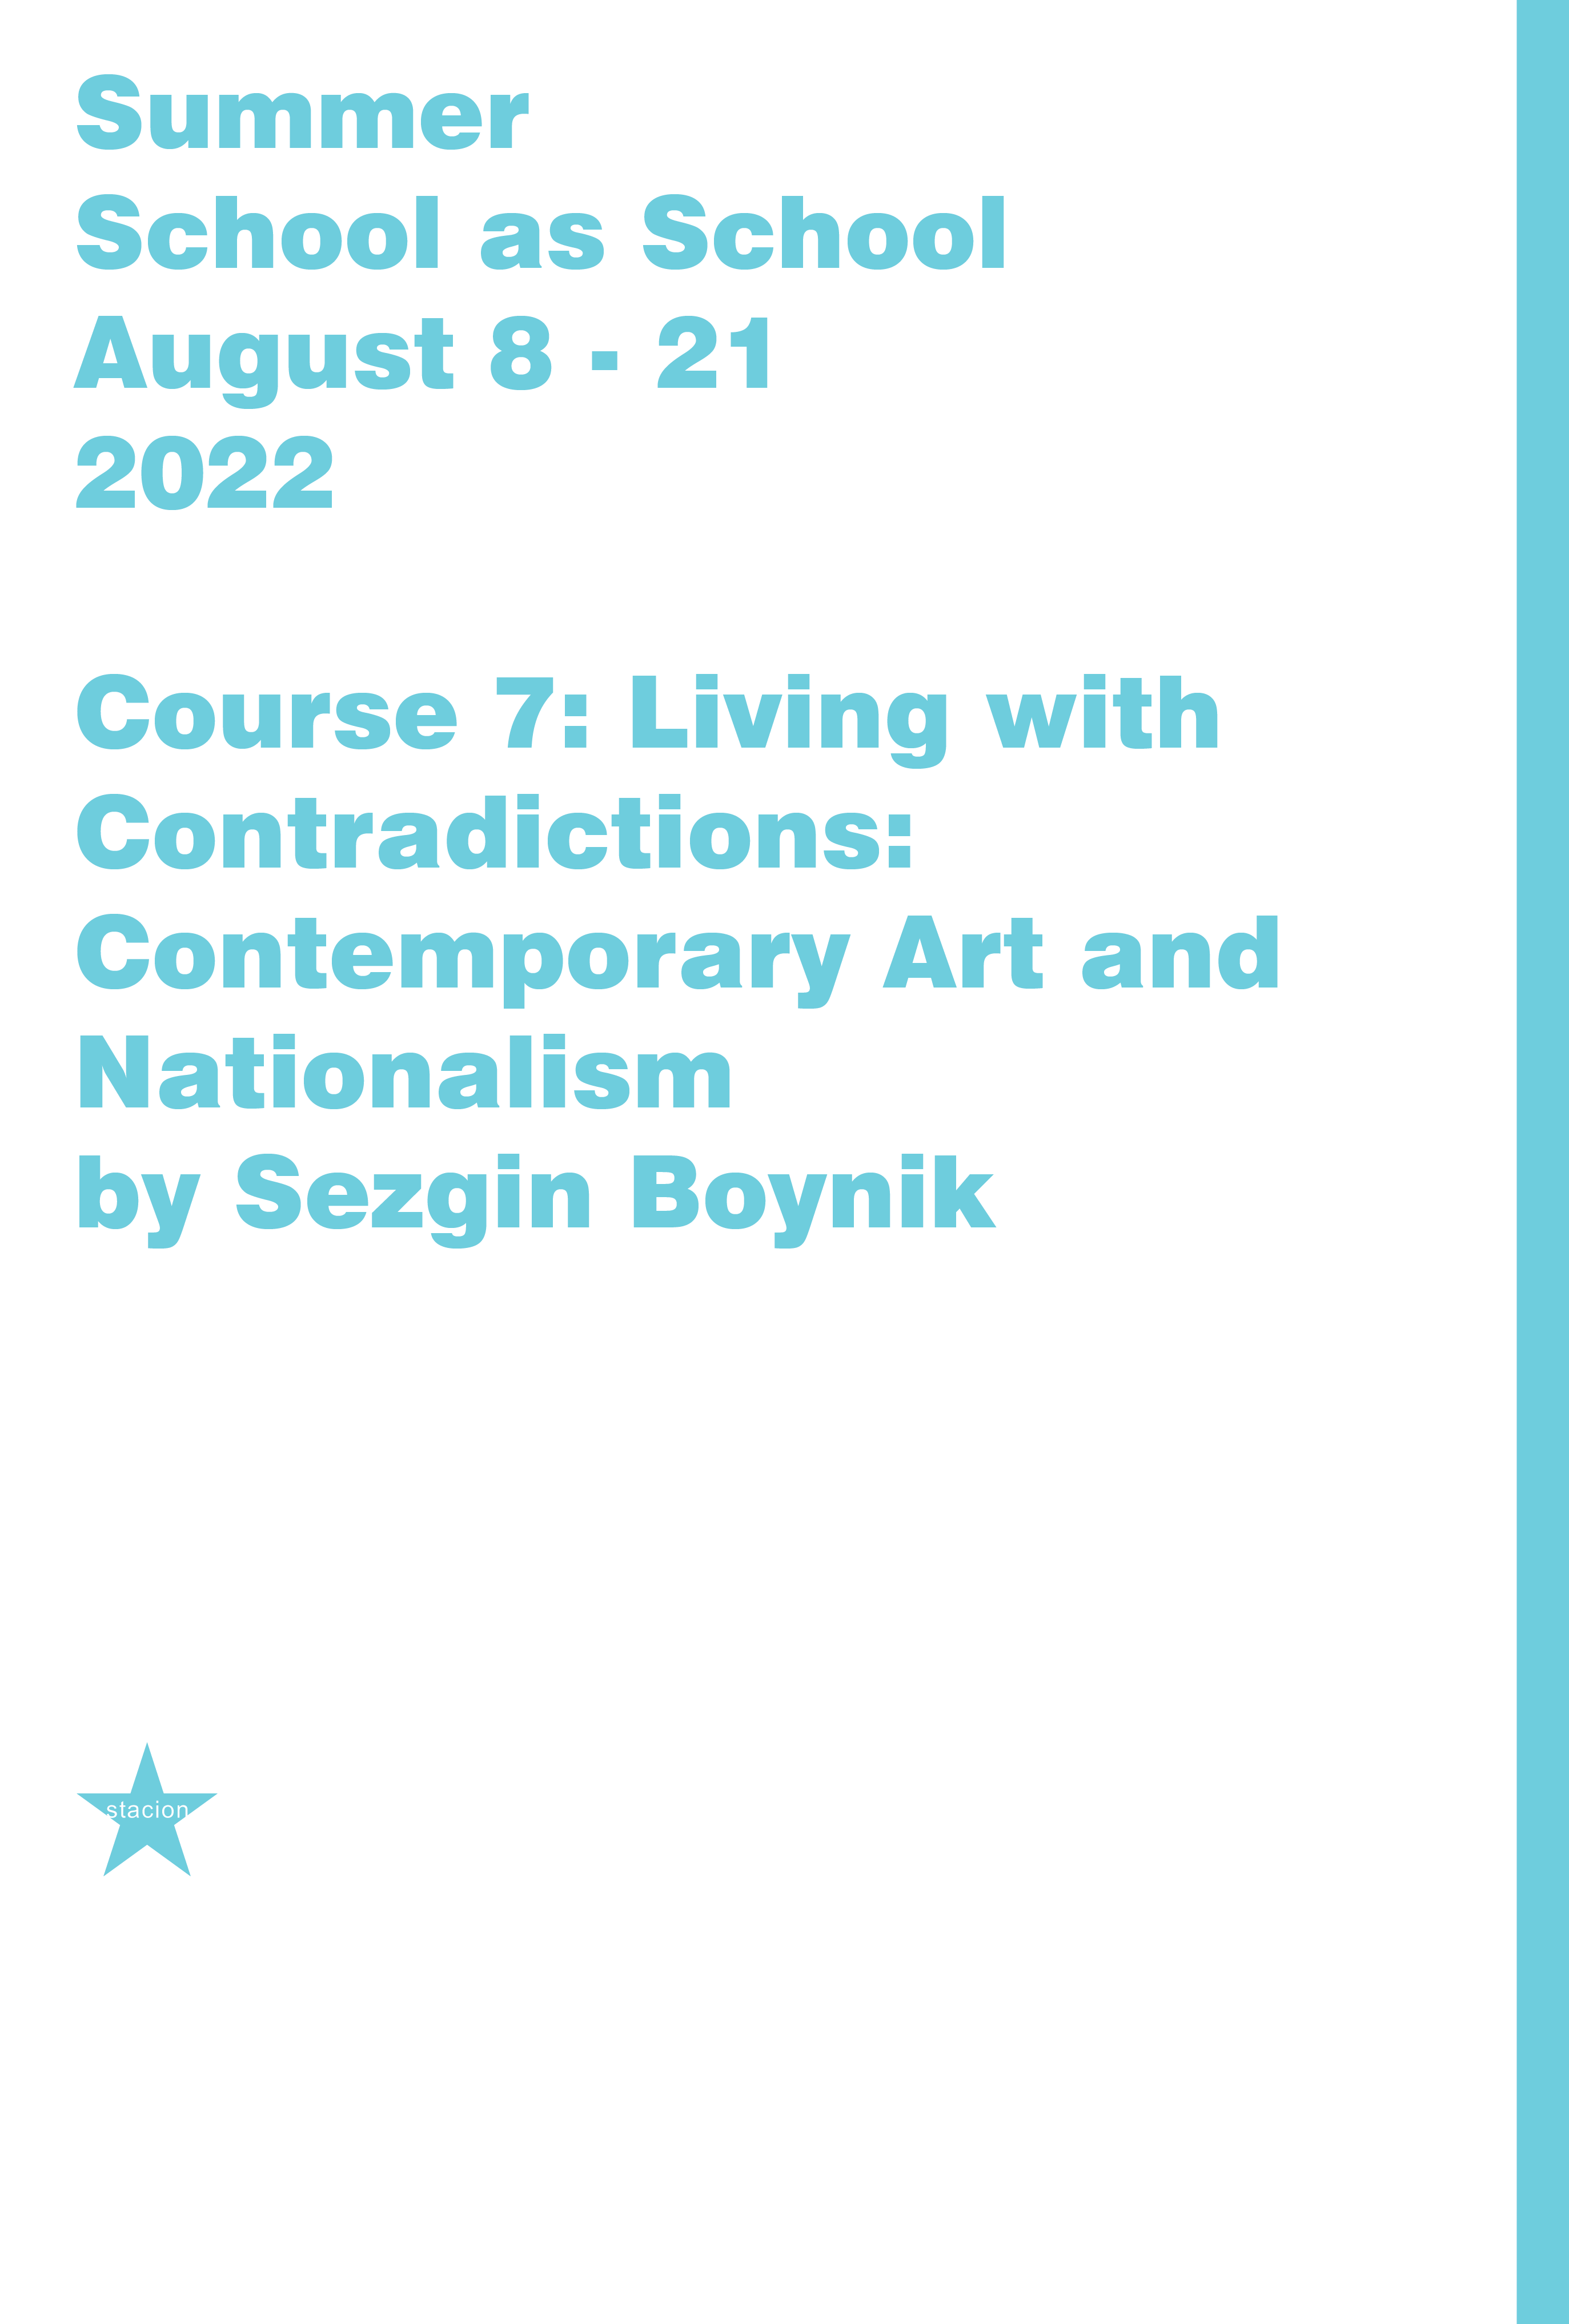 Course 7: Living with Contradictions: Contemporary Art and Nationalism